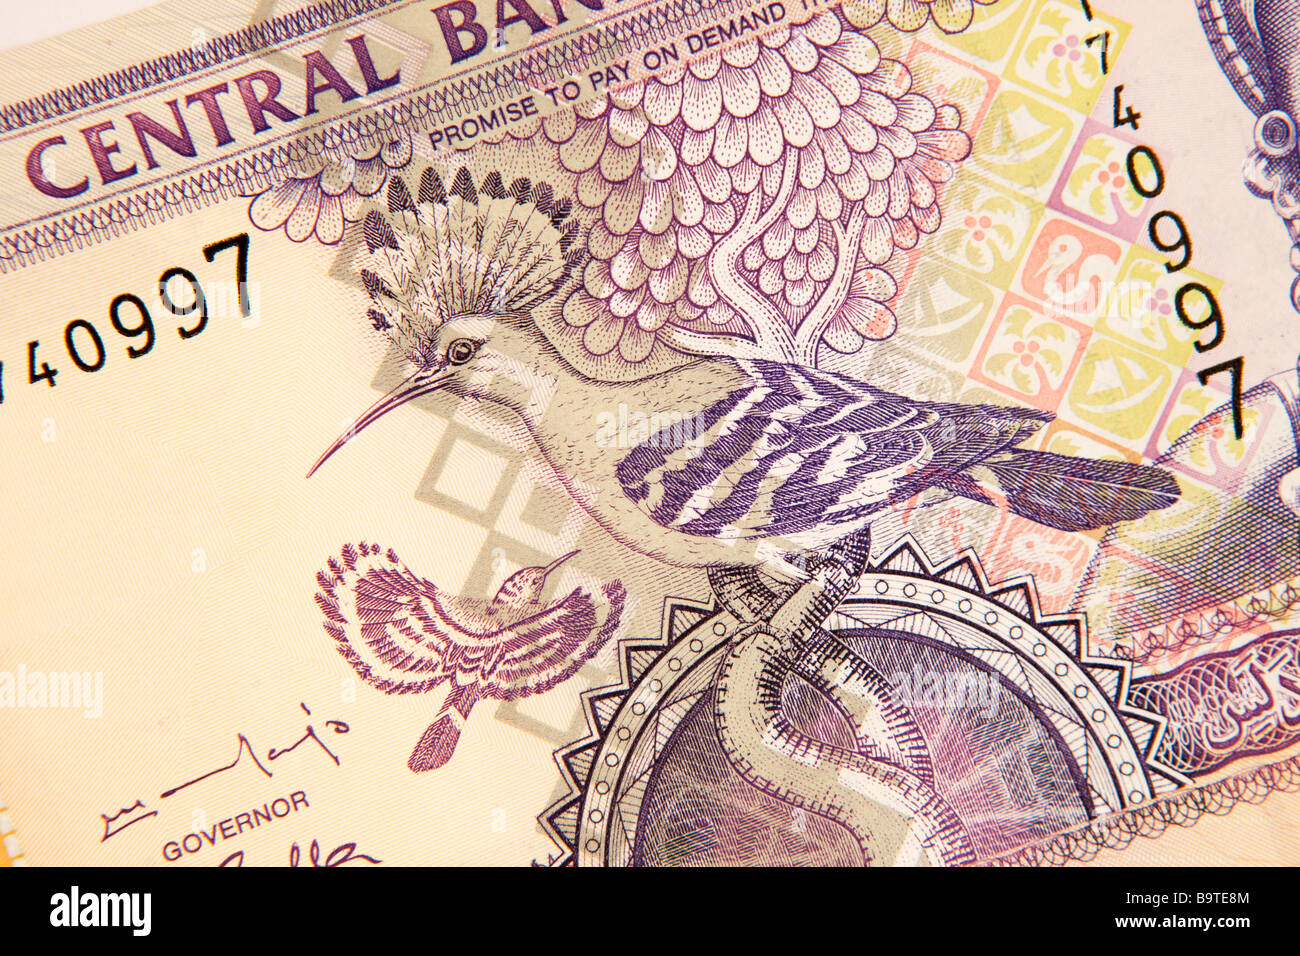 Money currency detail of Hoopoe bird design on Gambia 50 Dalasi banknote Stock Photo